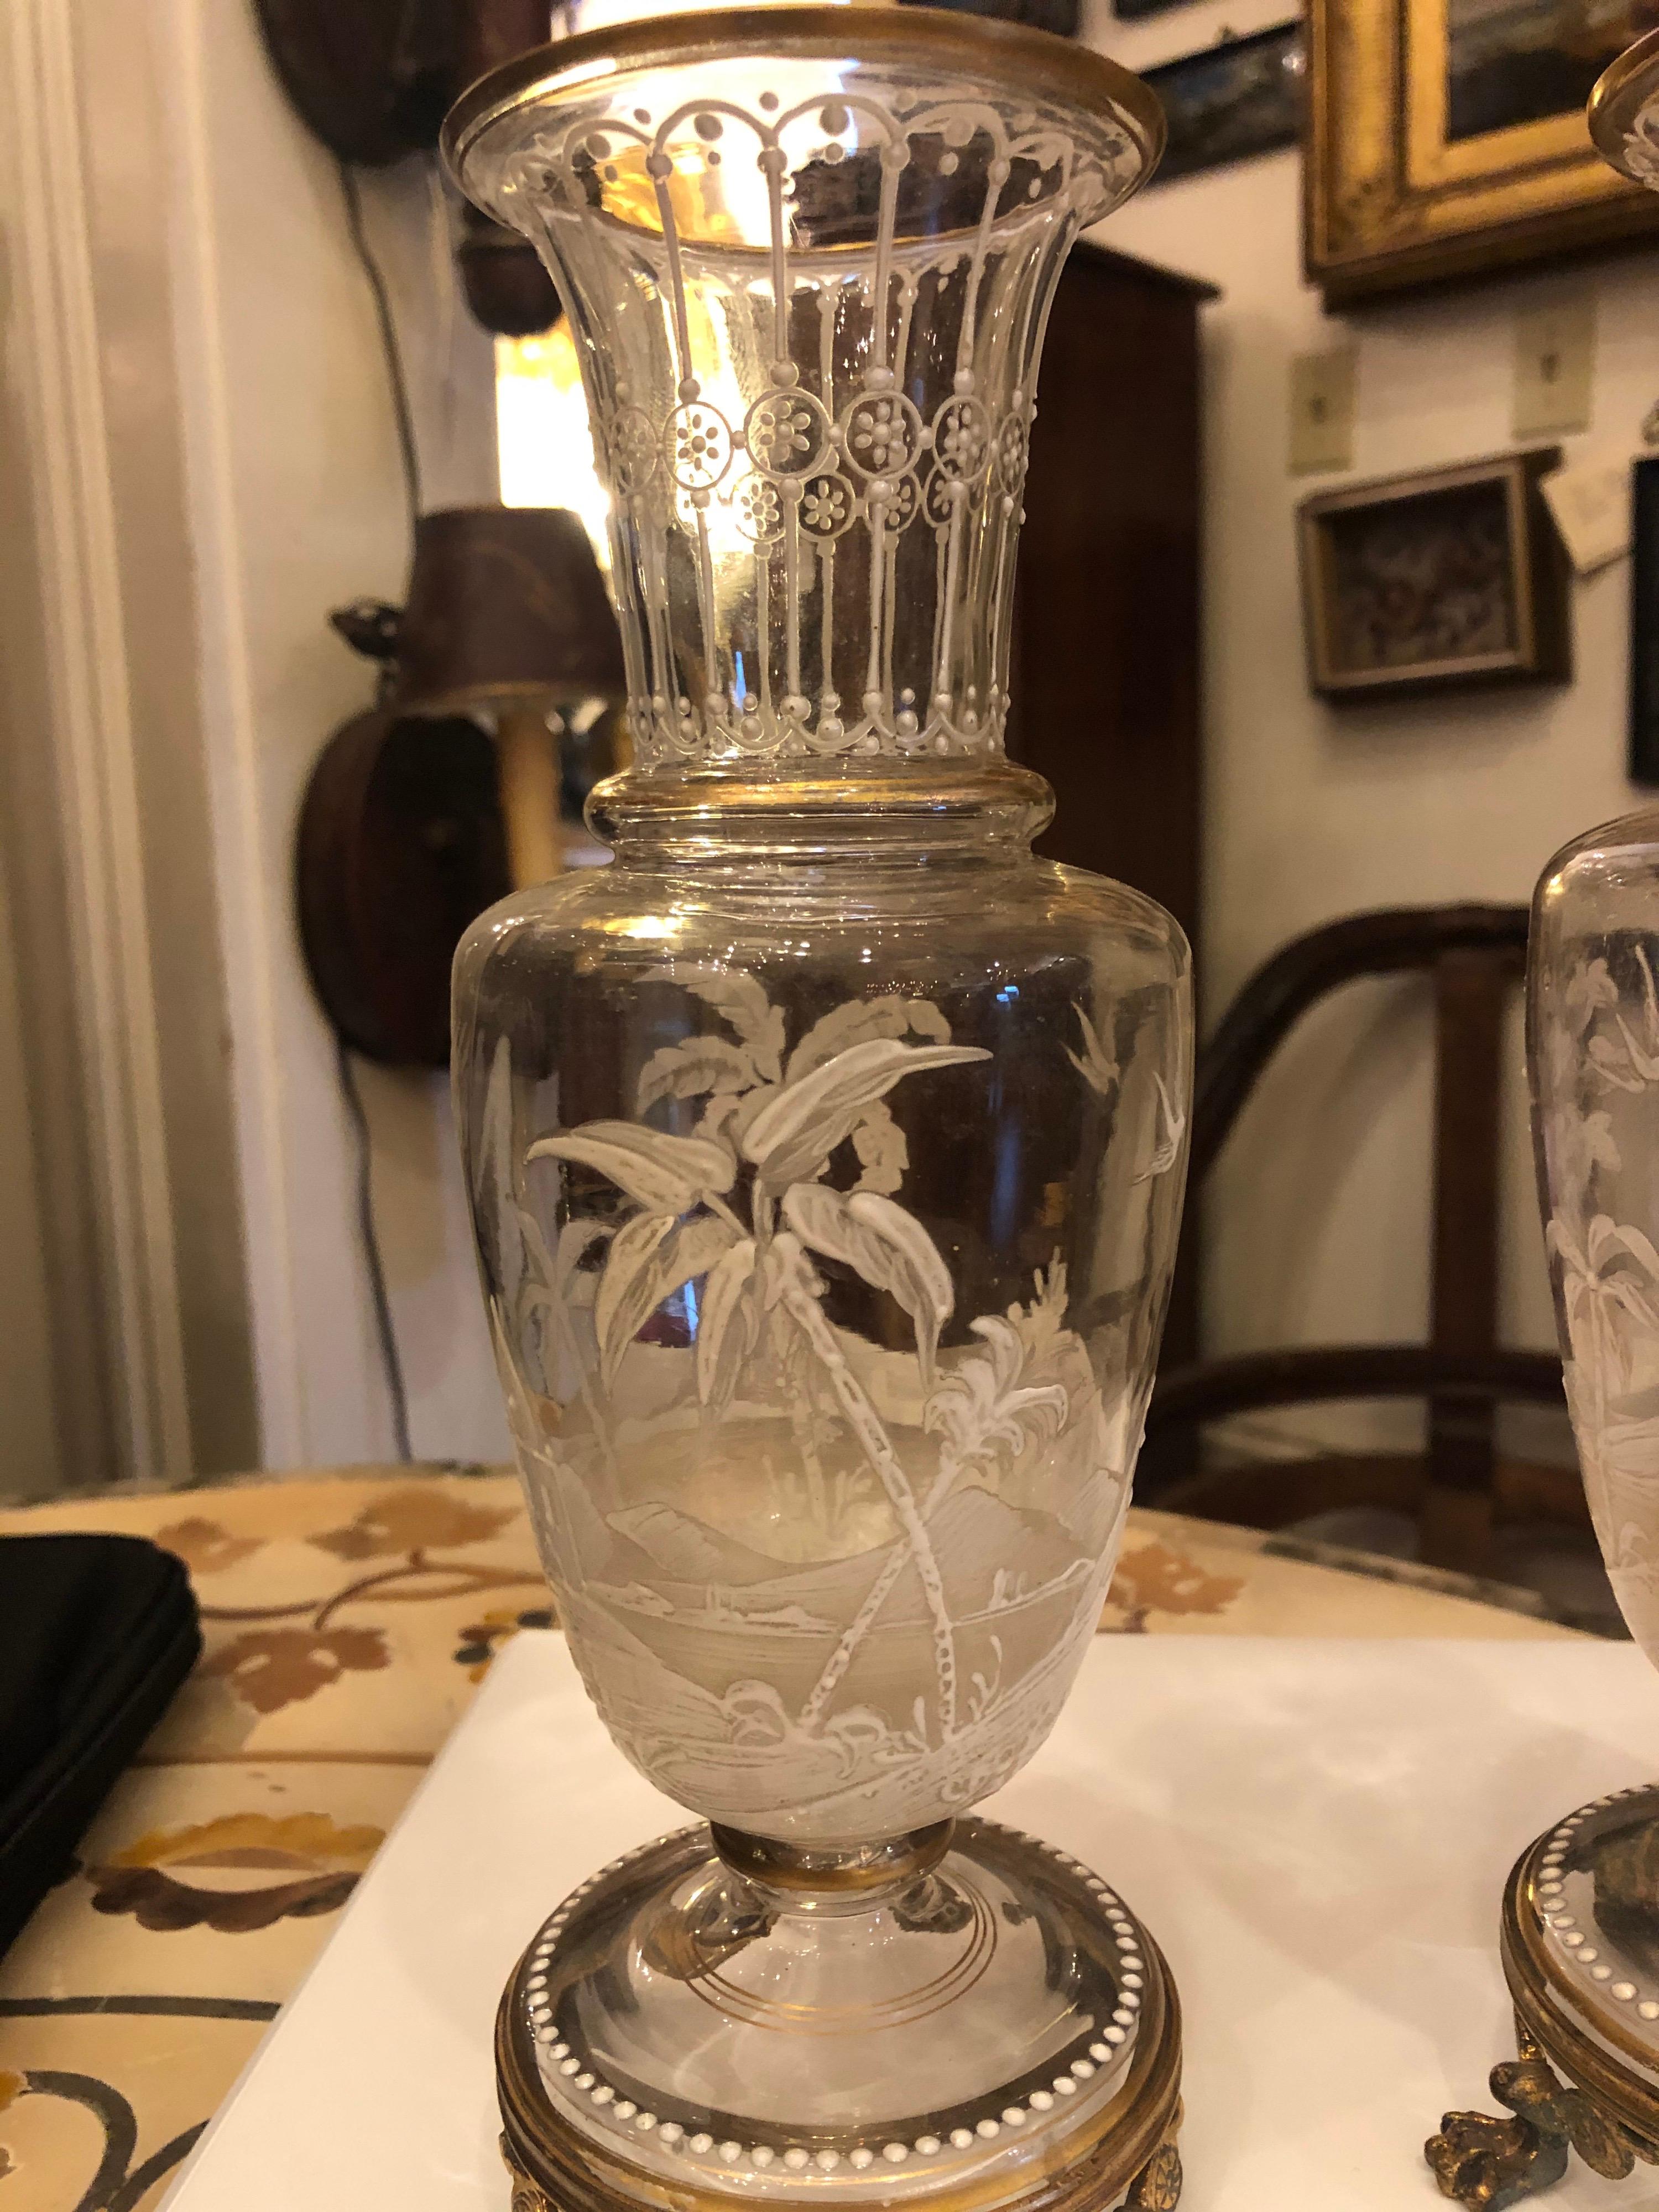 Pair of gilt bronze mounted Baccarat crystal vases with enamel decoration in white.
     